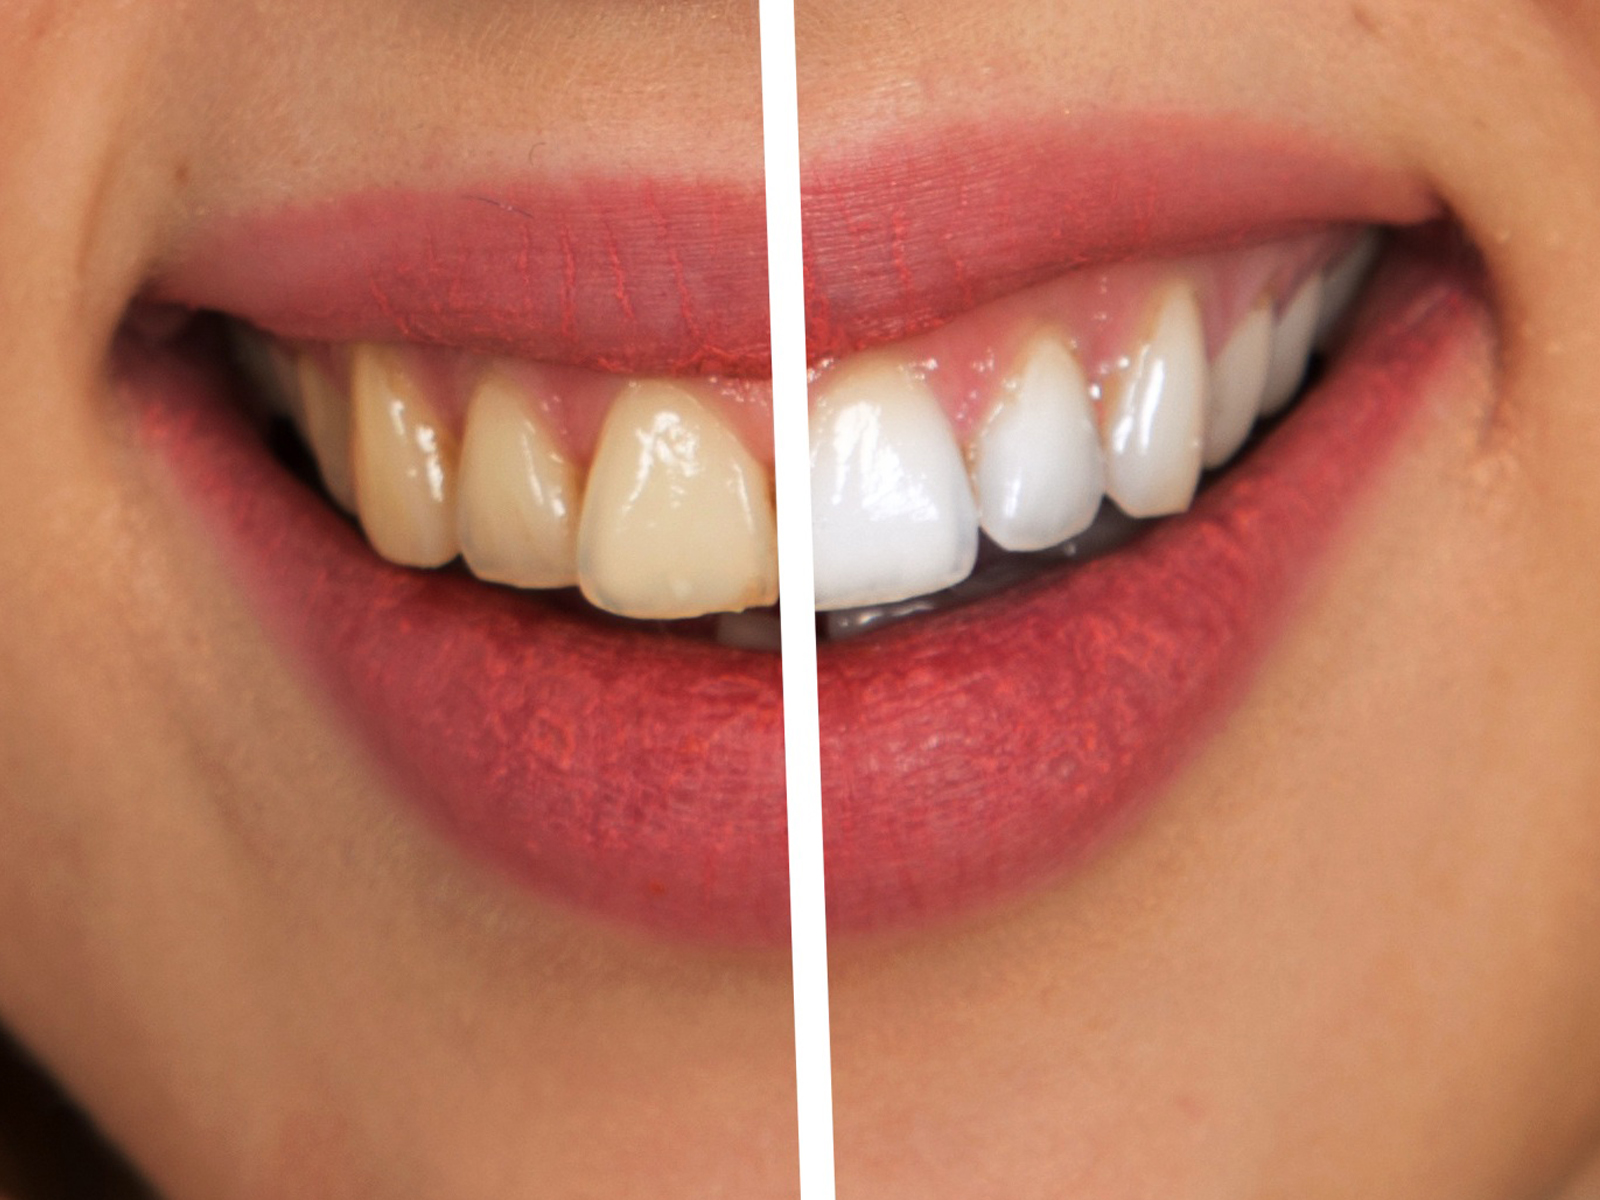 Treatment for Discolored or Yellowed Teeth